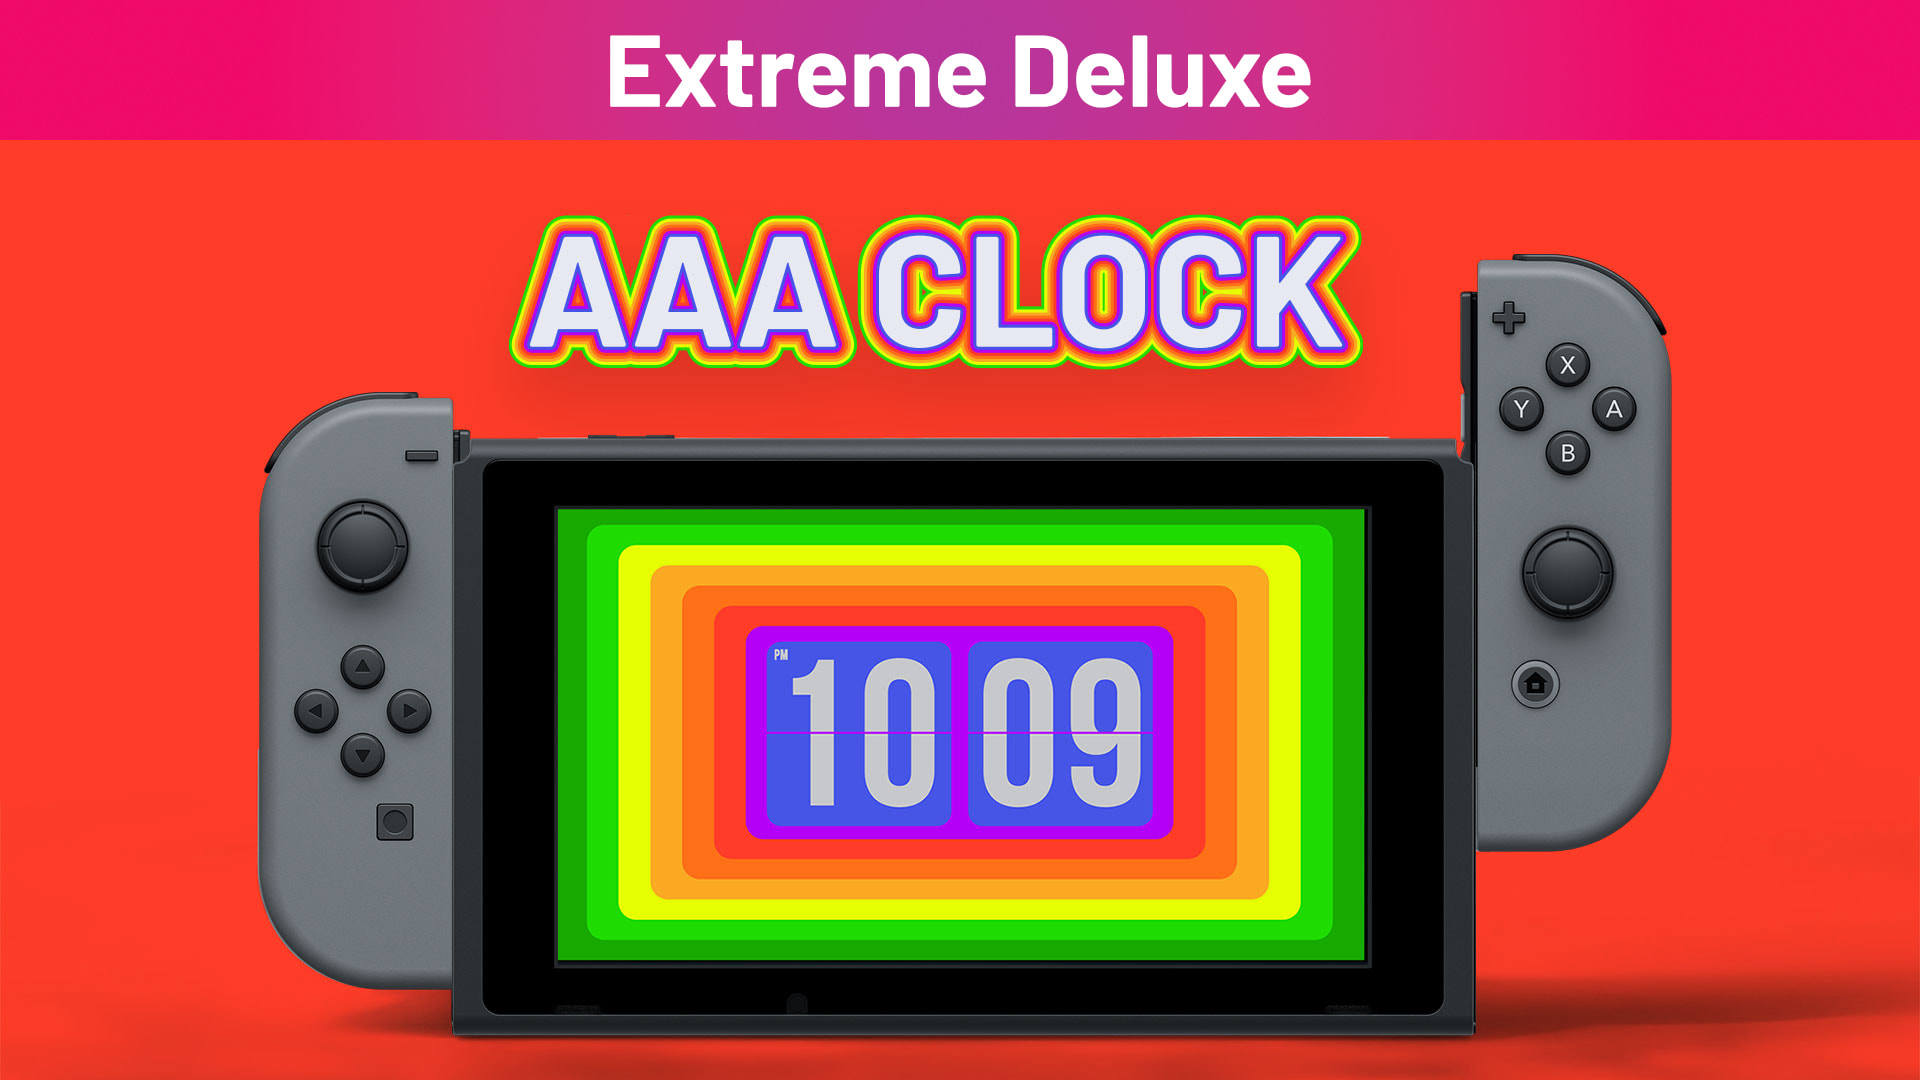 AAA Clock Extreme Deluxe